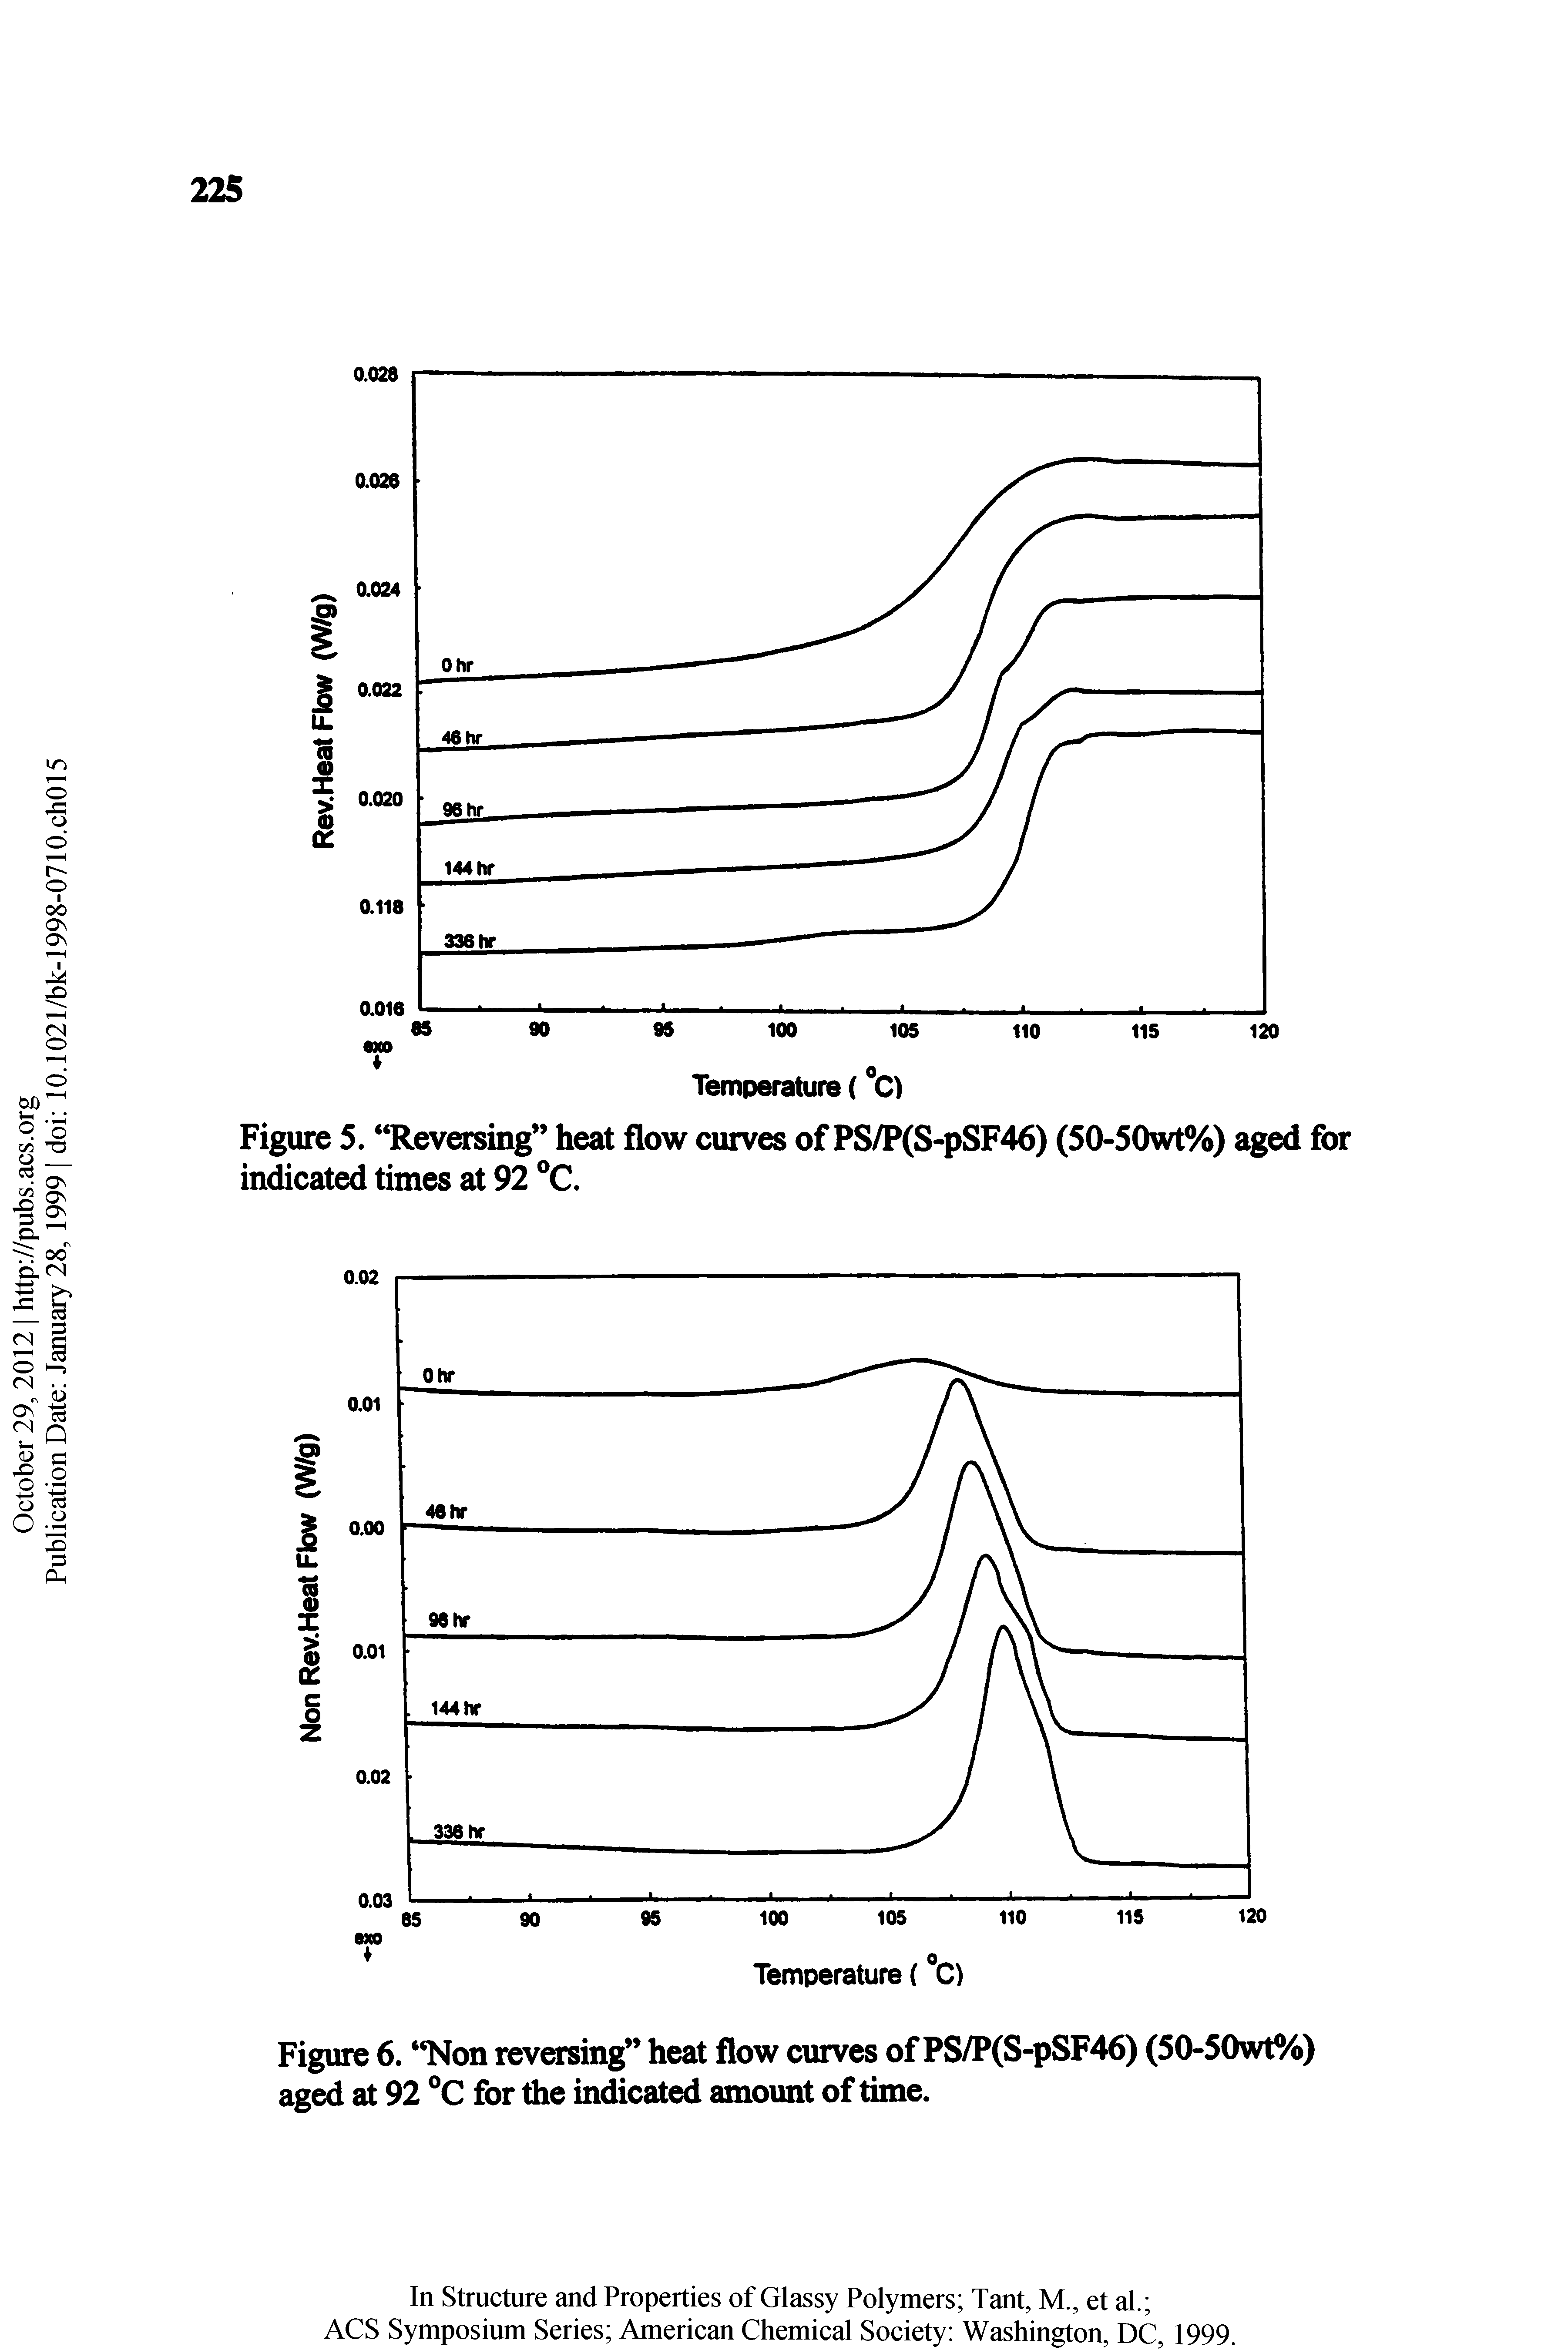 Figure 5. Reversing heat flow curves of PS/P(S-pSF46) (50-50wt%) aged for indicated times at 92 °C.